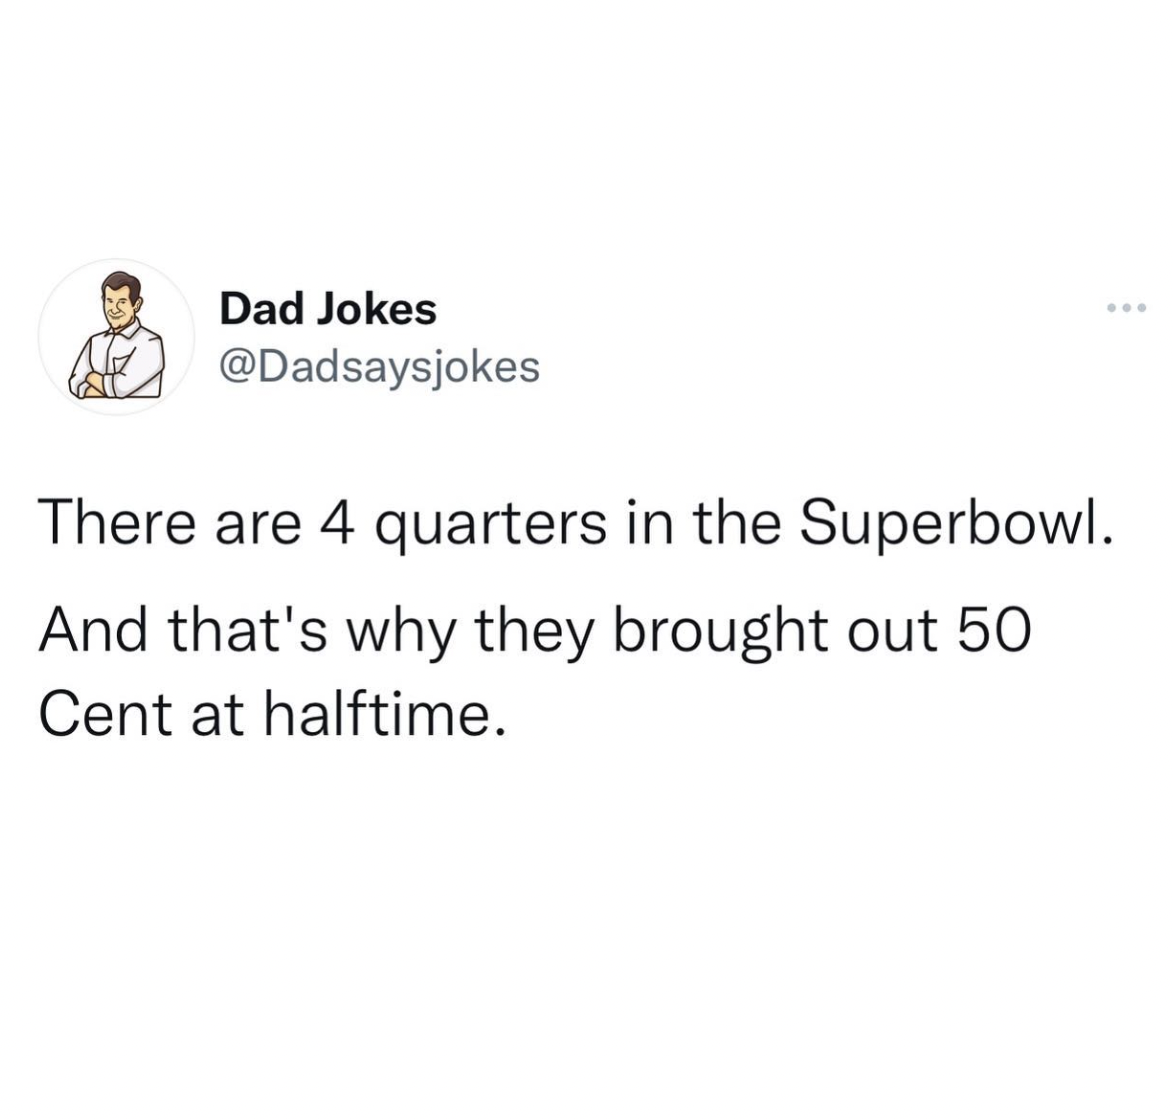 super bowl memes 2022 - Dad Jokes There are 4 quarters in the Superbowl. And that's why they brought out 50 Cent at halftime.